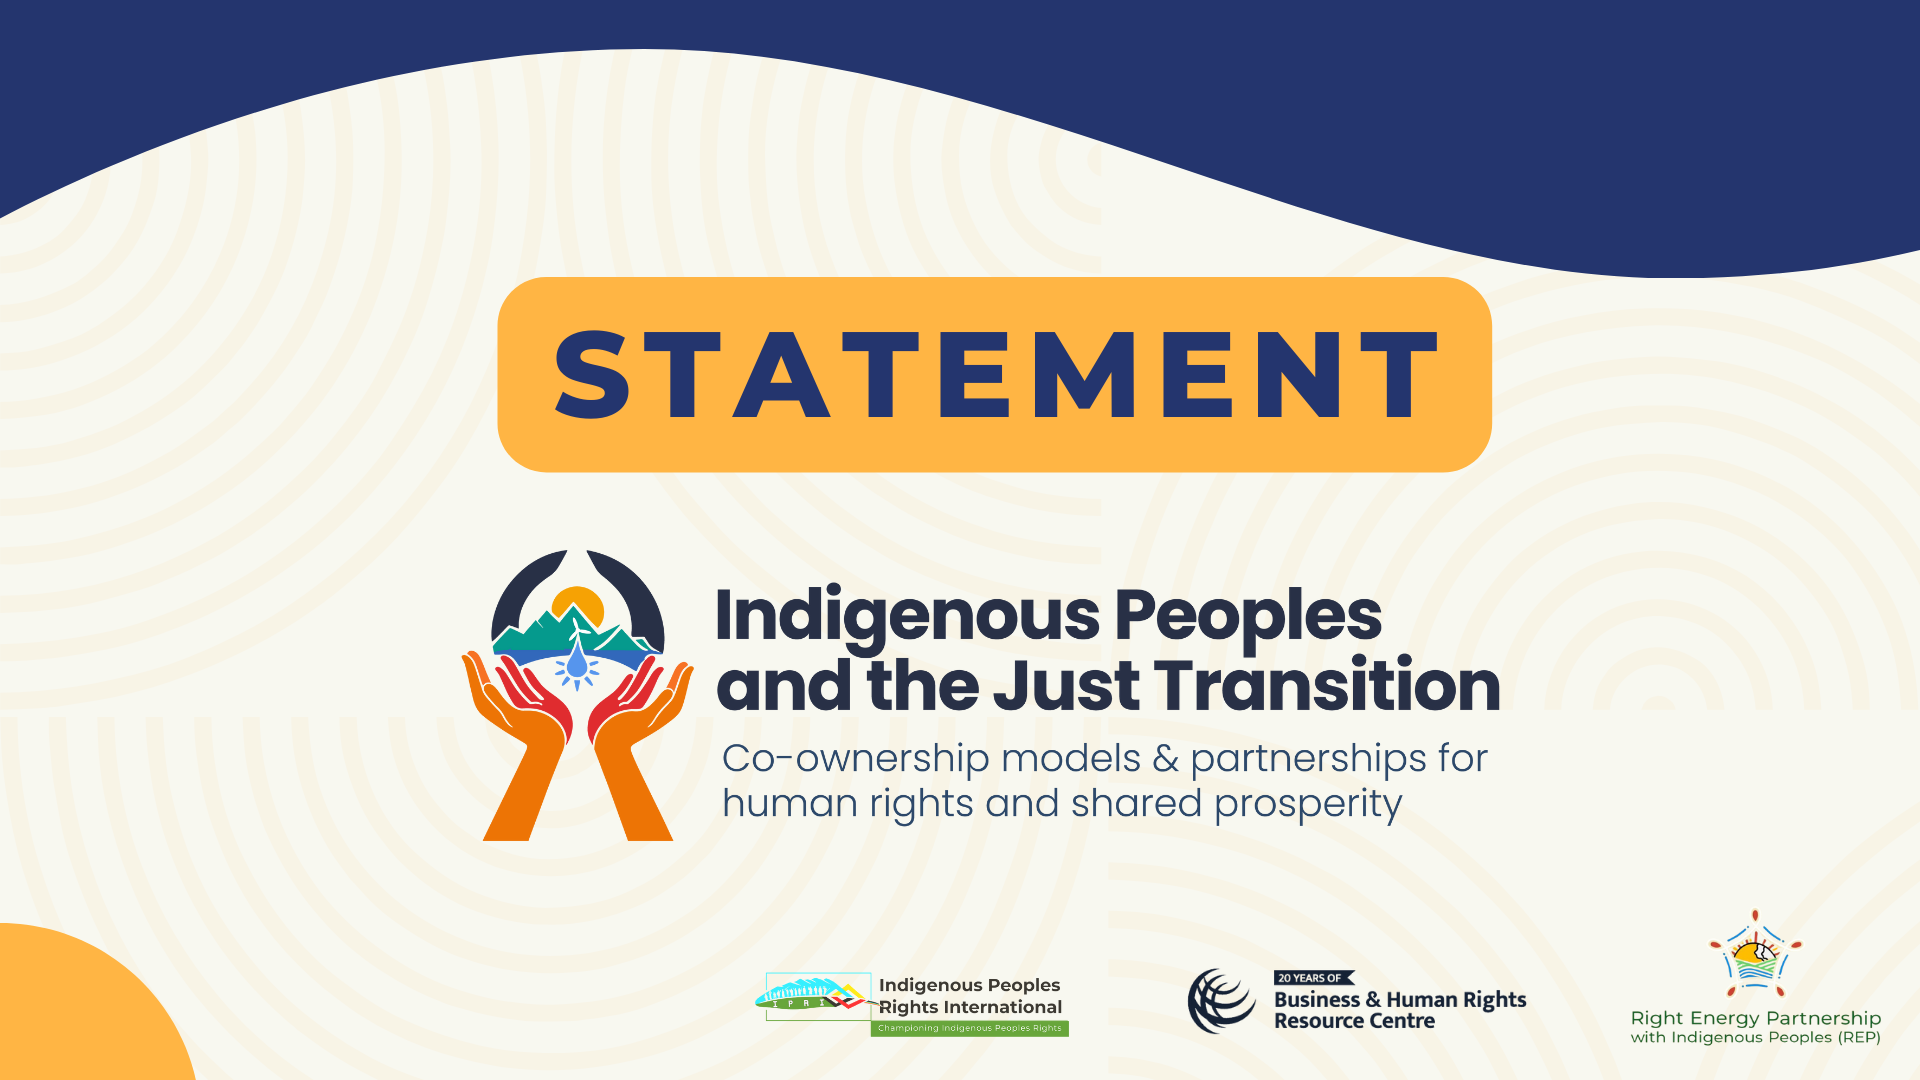 Declaration of Indigenous Peoples’ Participants in the Conference on  Indigenous Peoples and the Just Transition